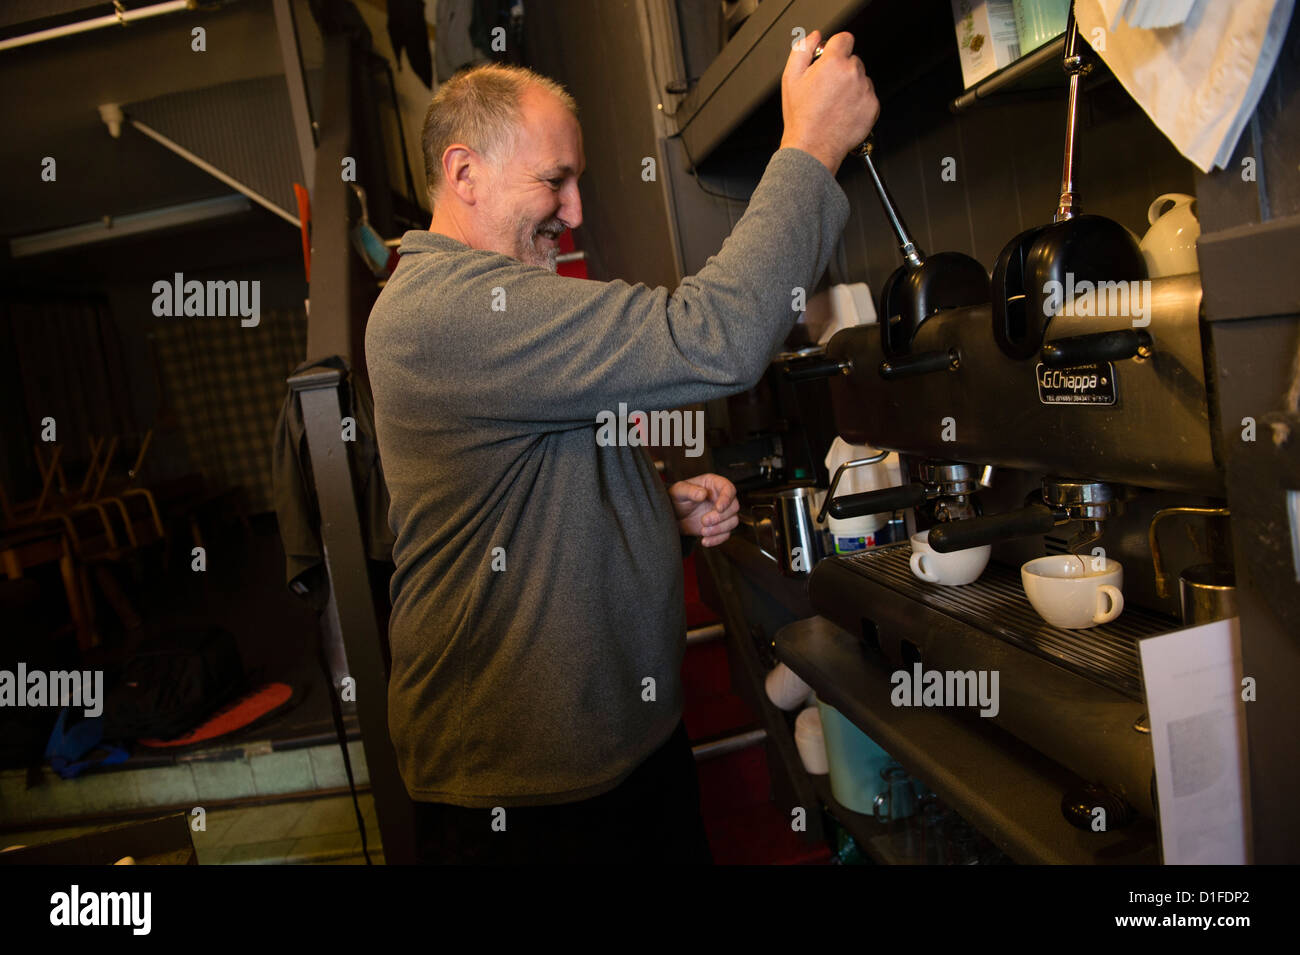 ANGELO CONTI making an espresso coffee in Conti's Cafe, Lampeter, Ceredigion Wales UK Stock Photo